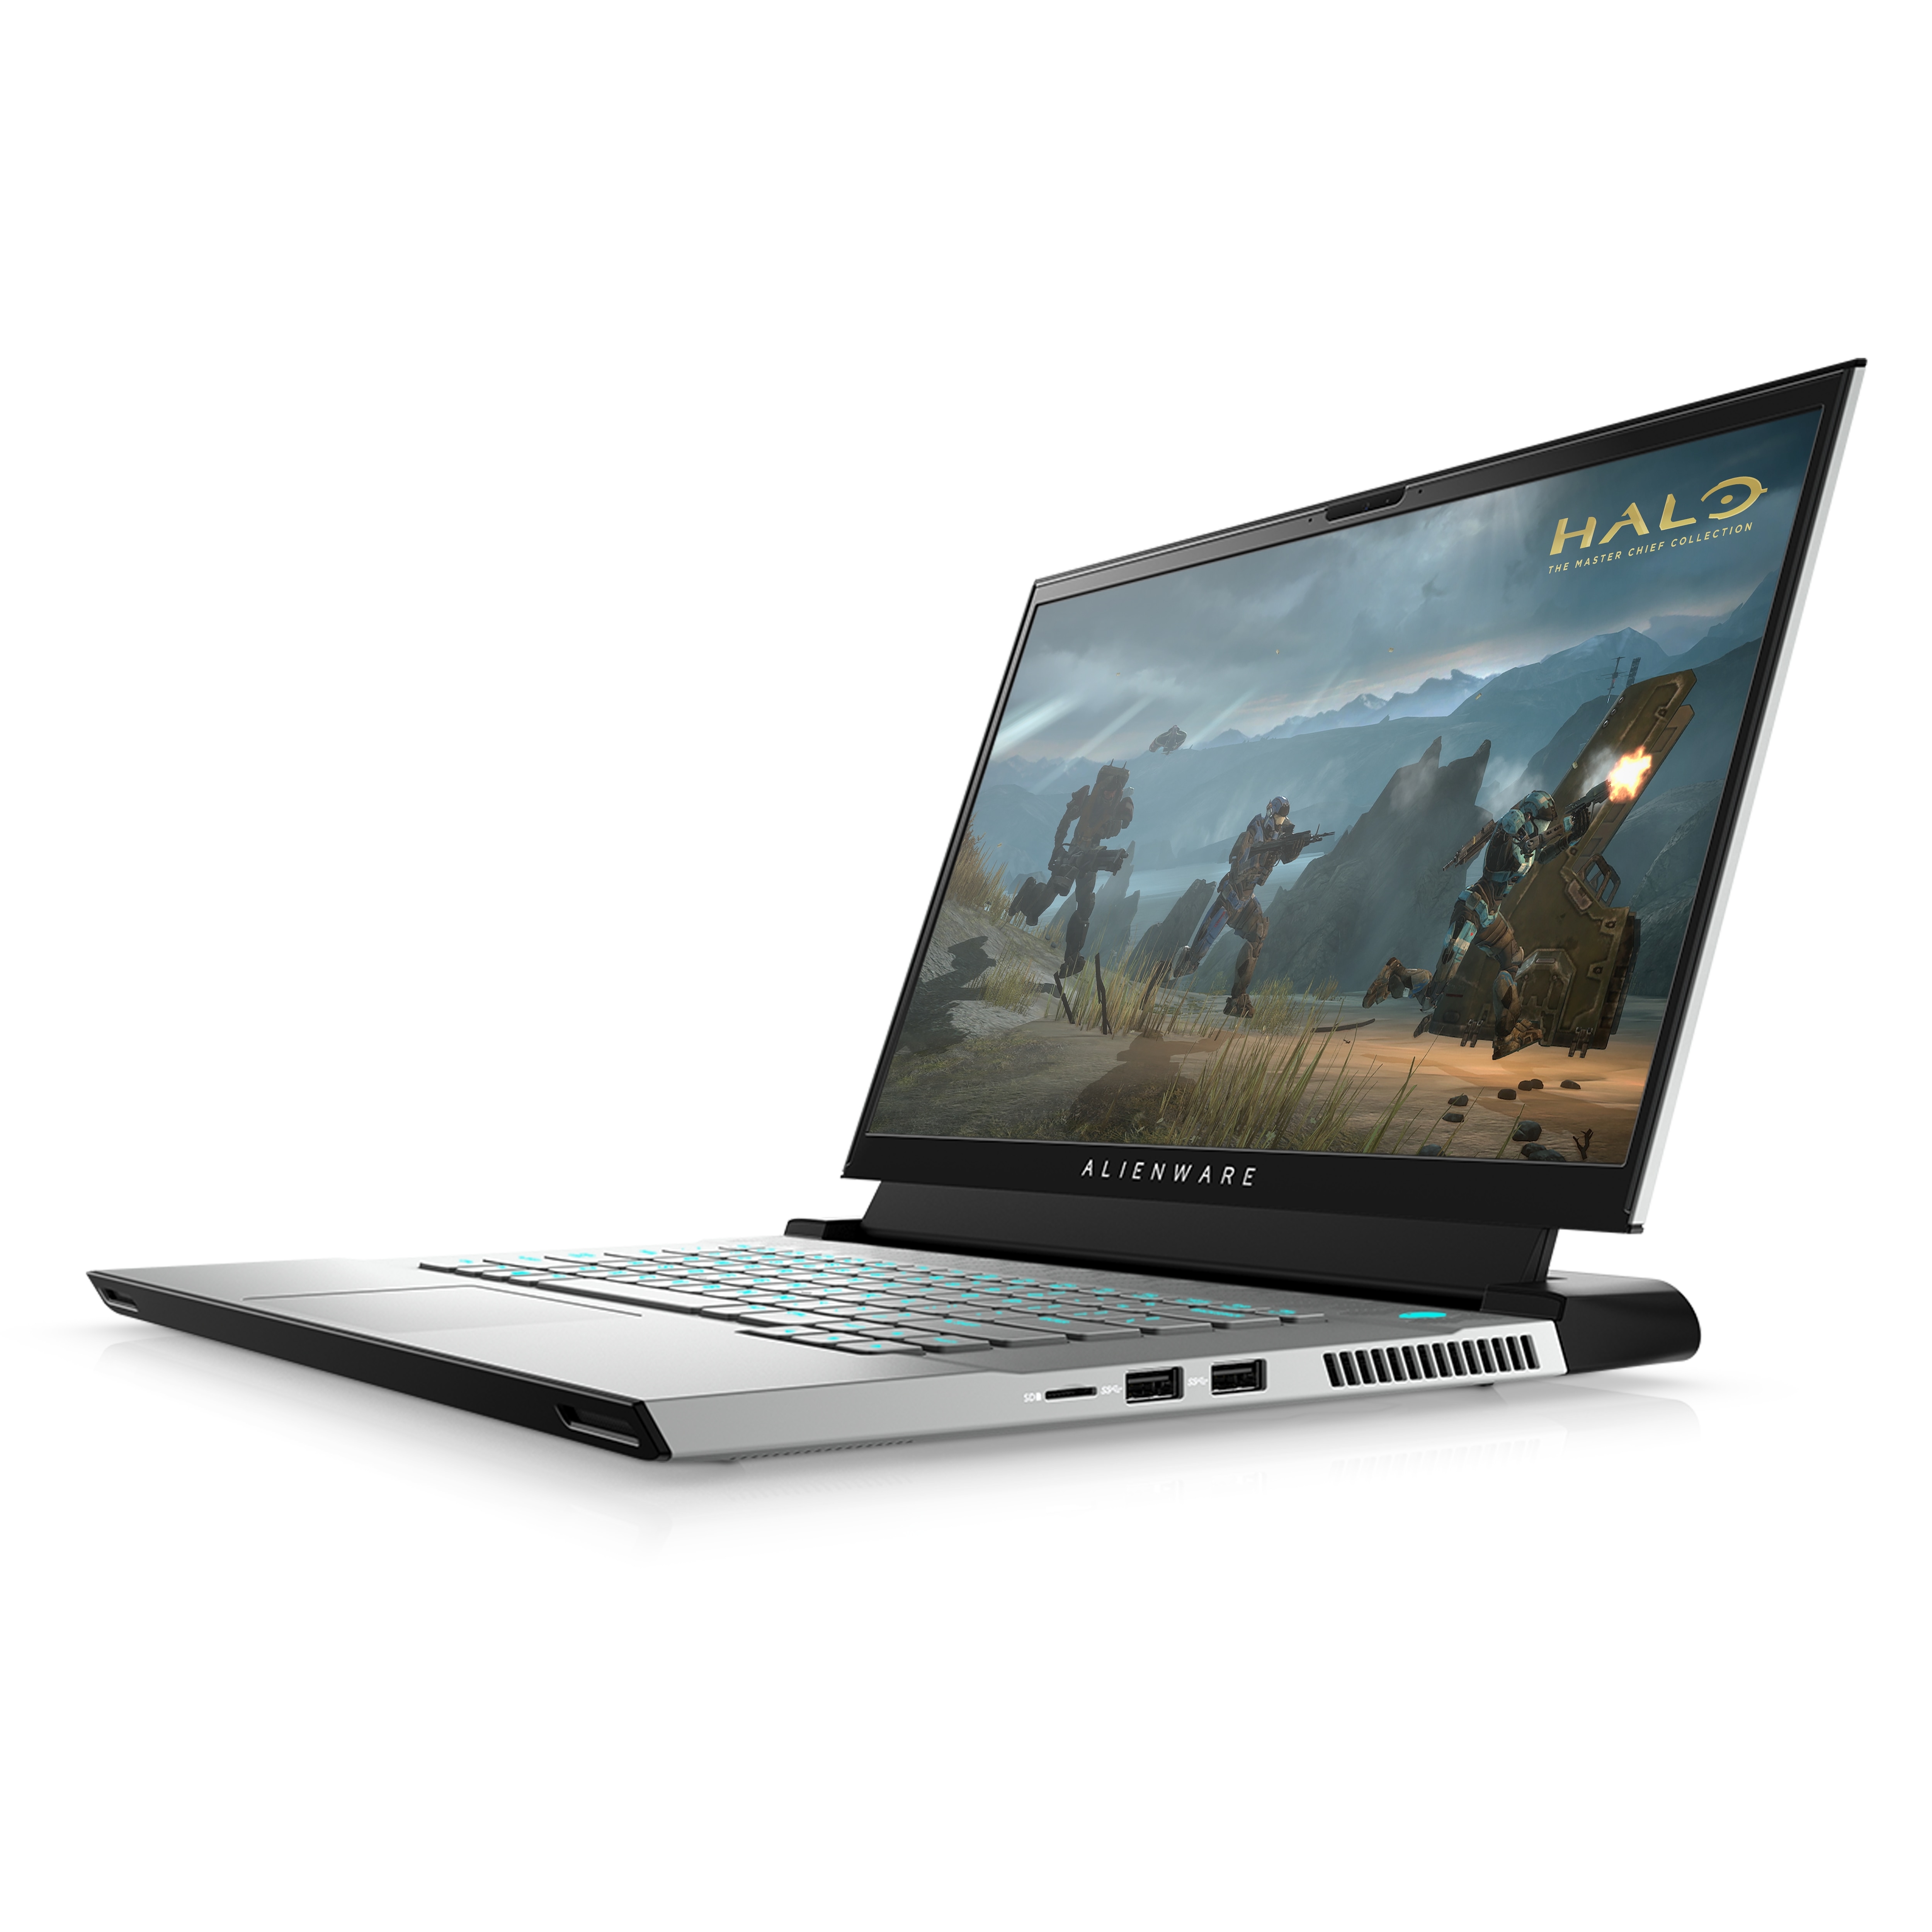 ALIENWARE M15 R4 GAMING LAPTOP RTX 3070 | Dell USA - $1278